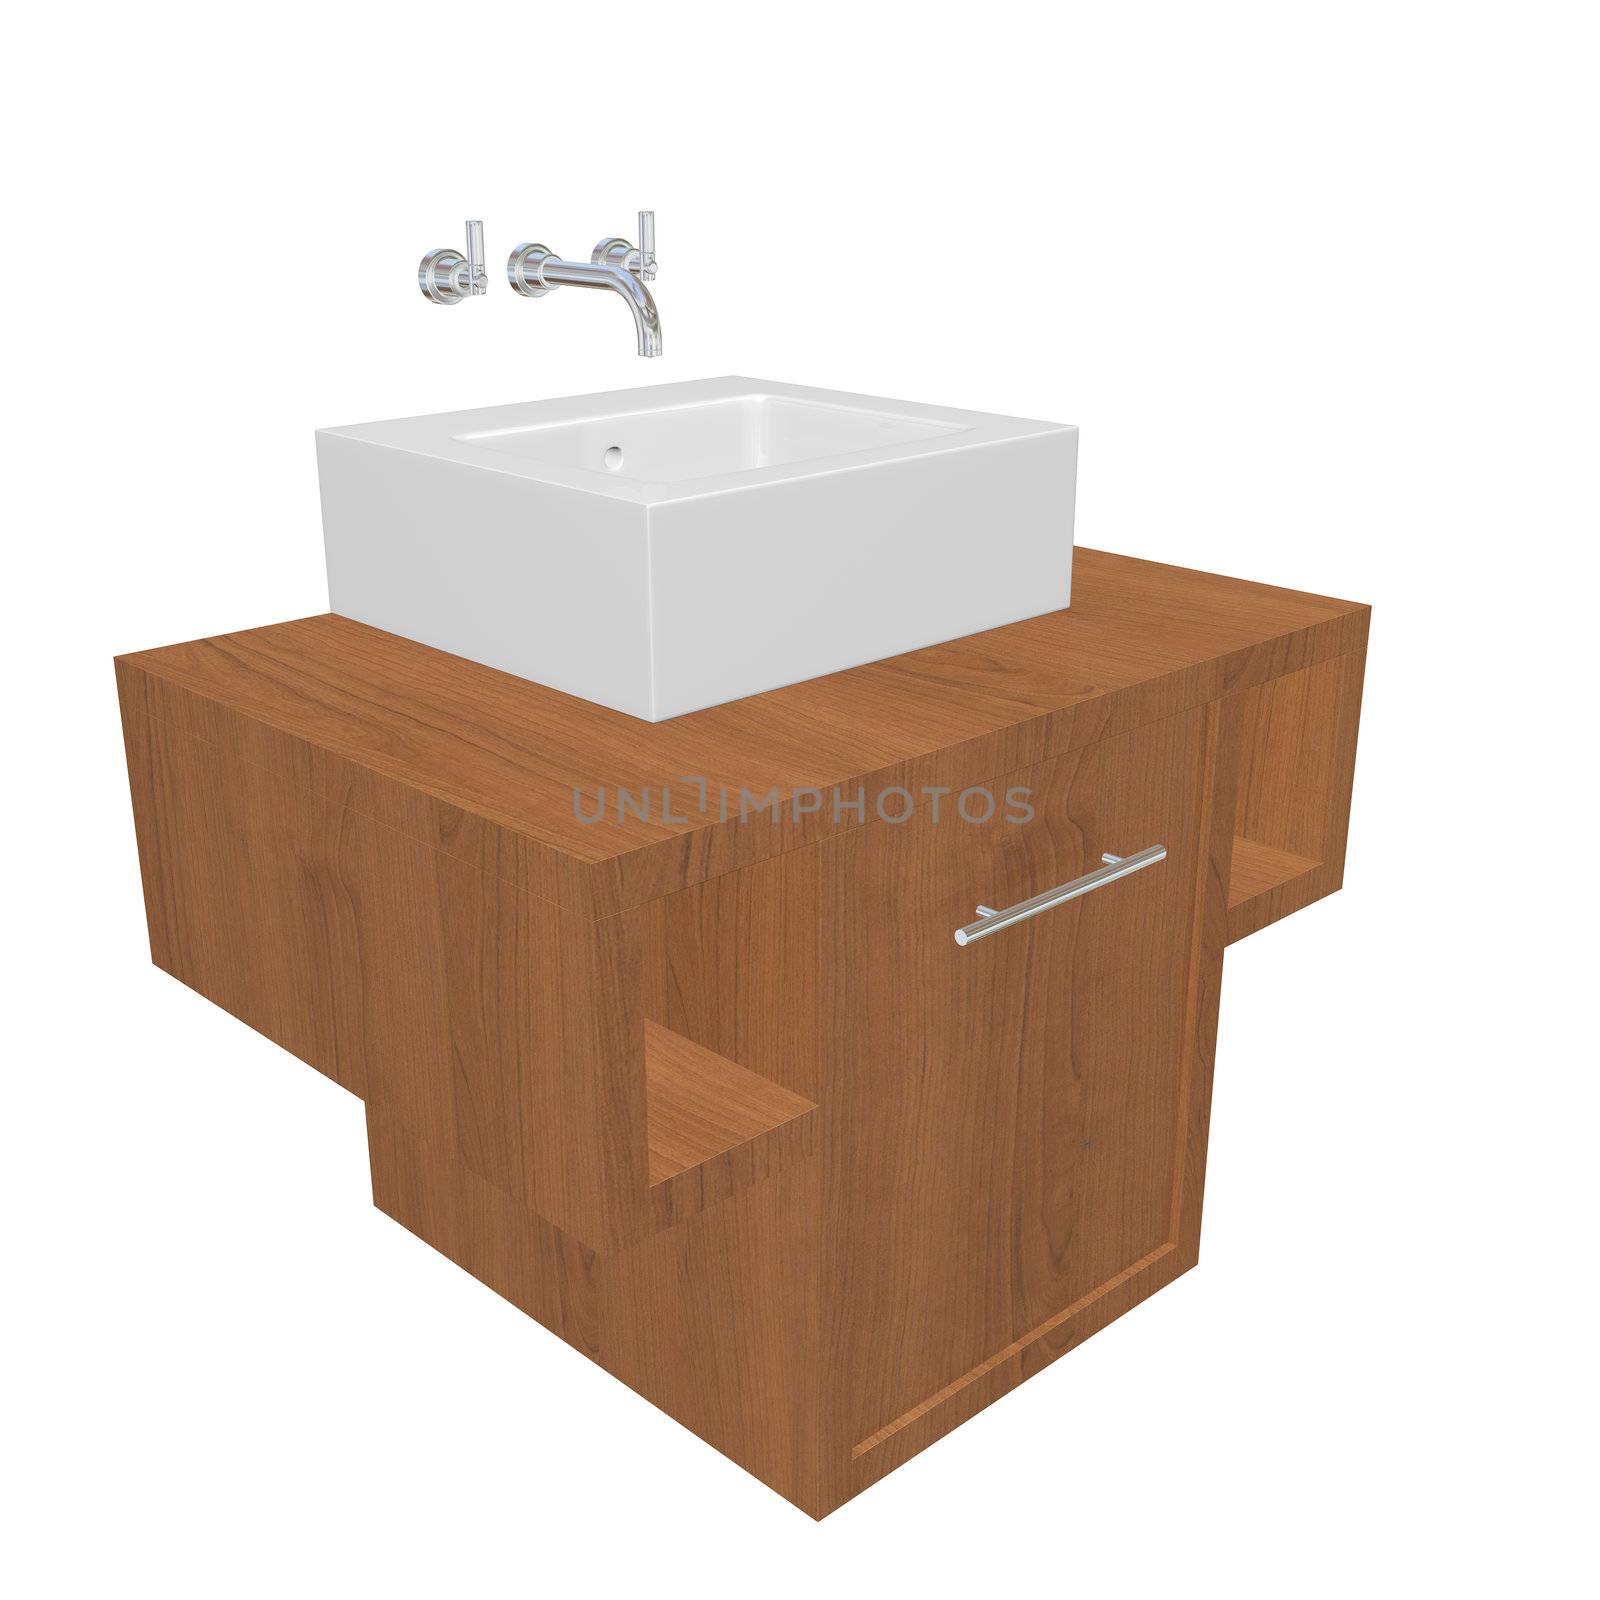 Modern bathroom sink set with ceramic wash basin and wooden cabi by Morphart